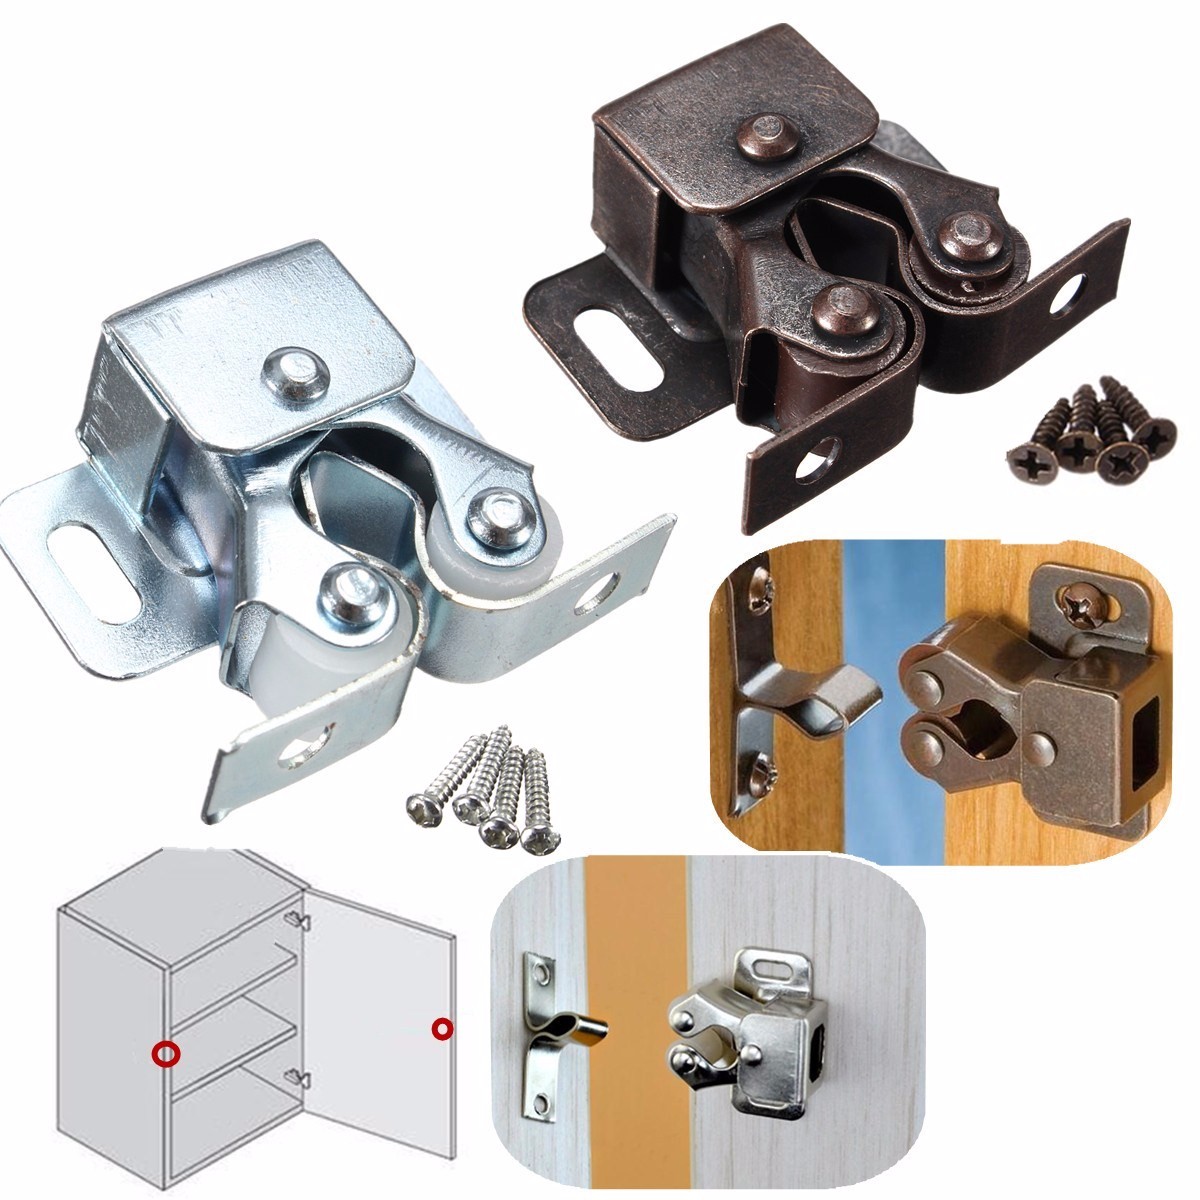 Double-Roller-Catch-Cupboard-Cabinet-Door-Furniture-Latch-Hardware-with-Spear-Strikes-1198119-5